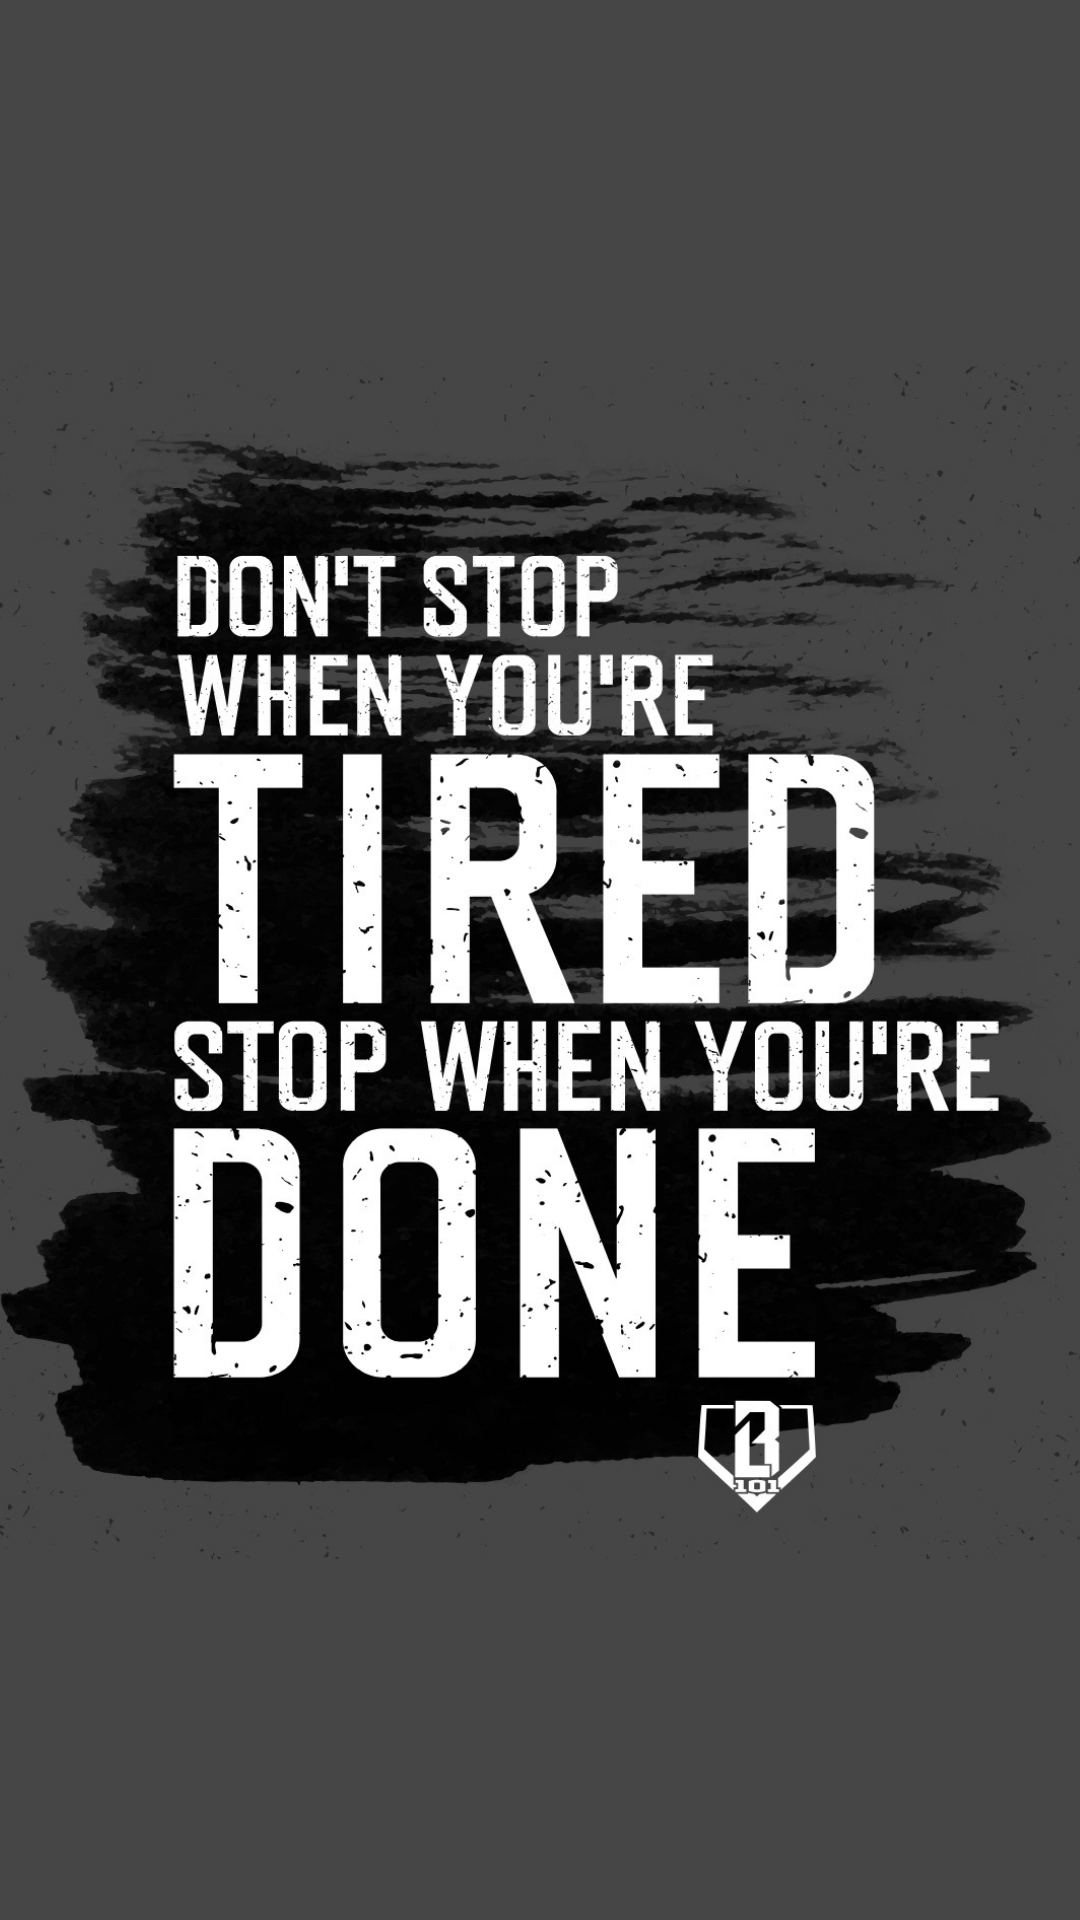 Wallpaper Wednesday - Don't Stop When You're Tired, Stop When You're Done